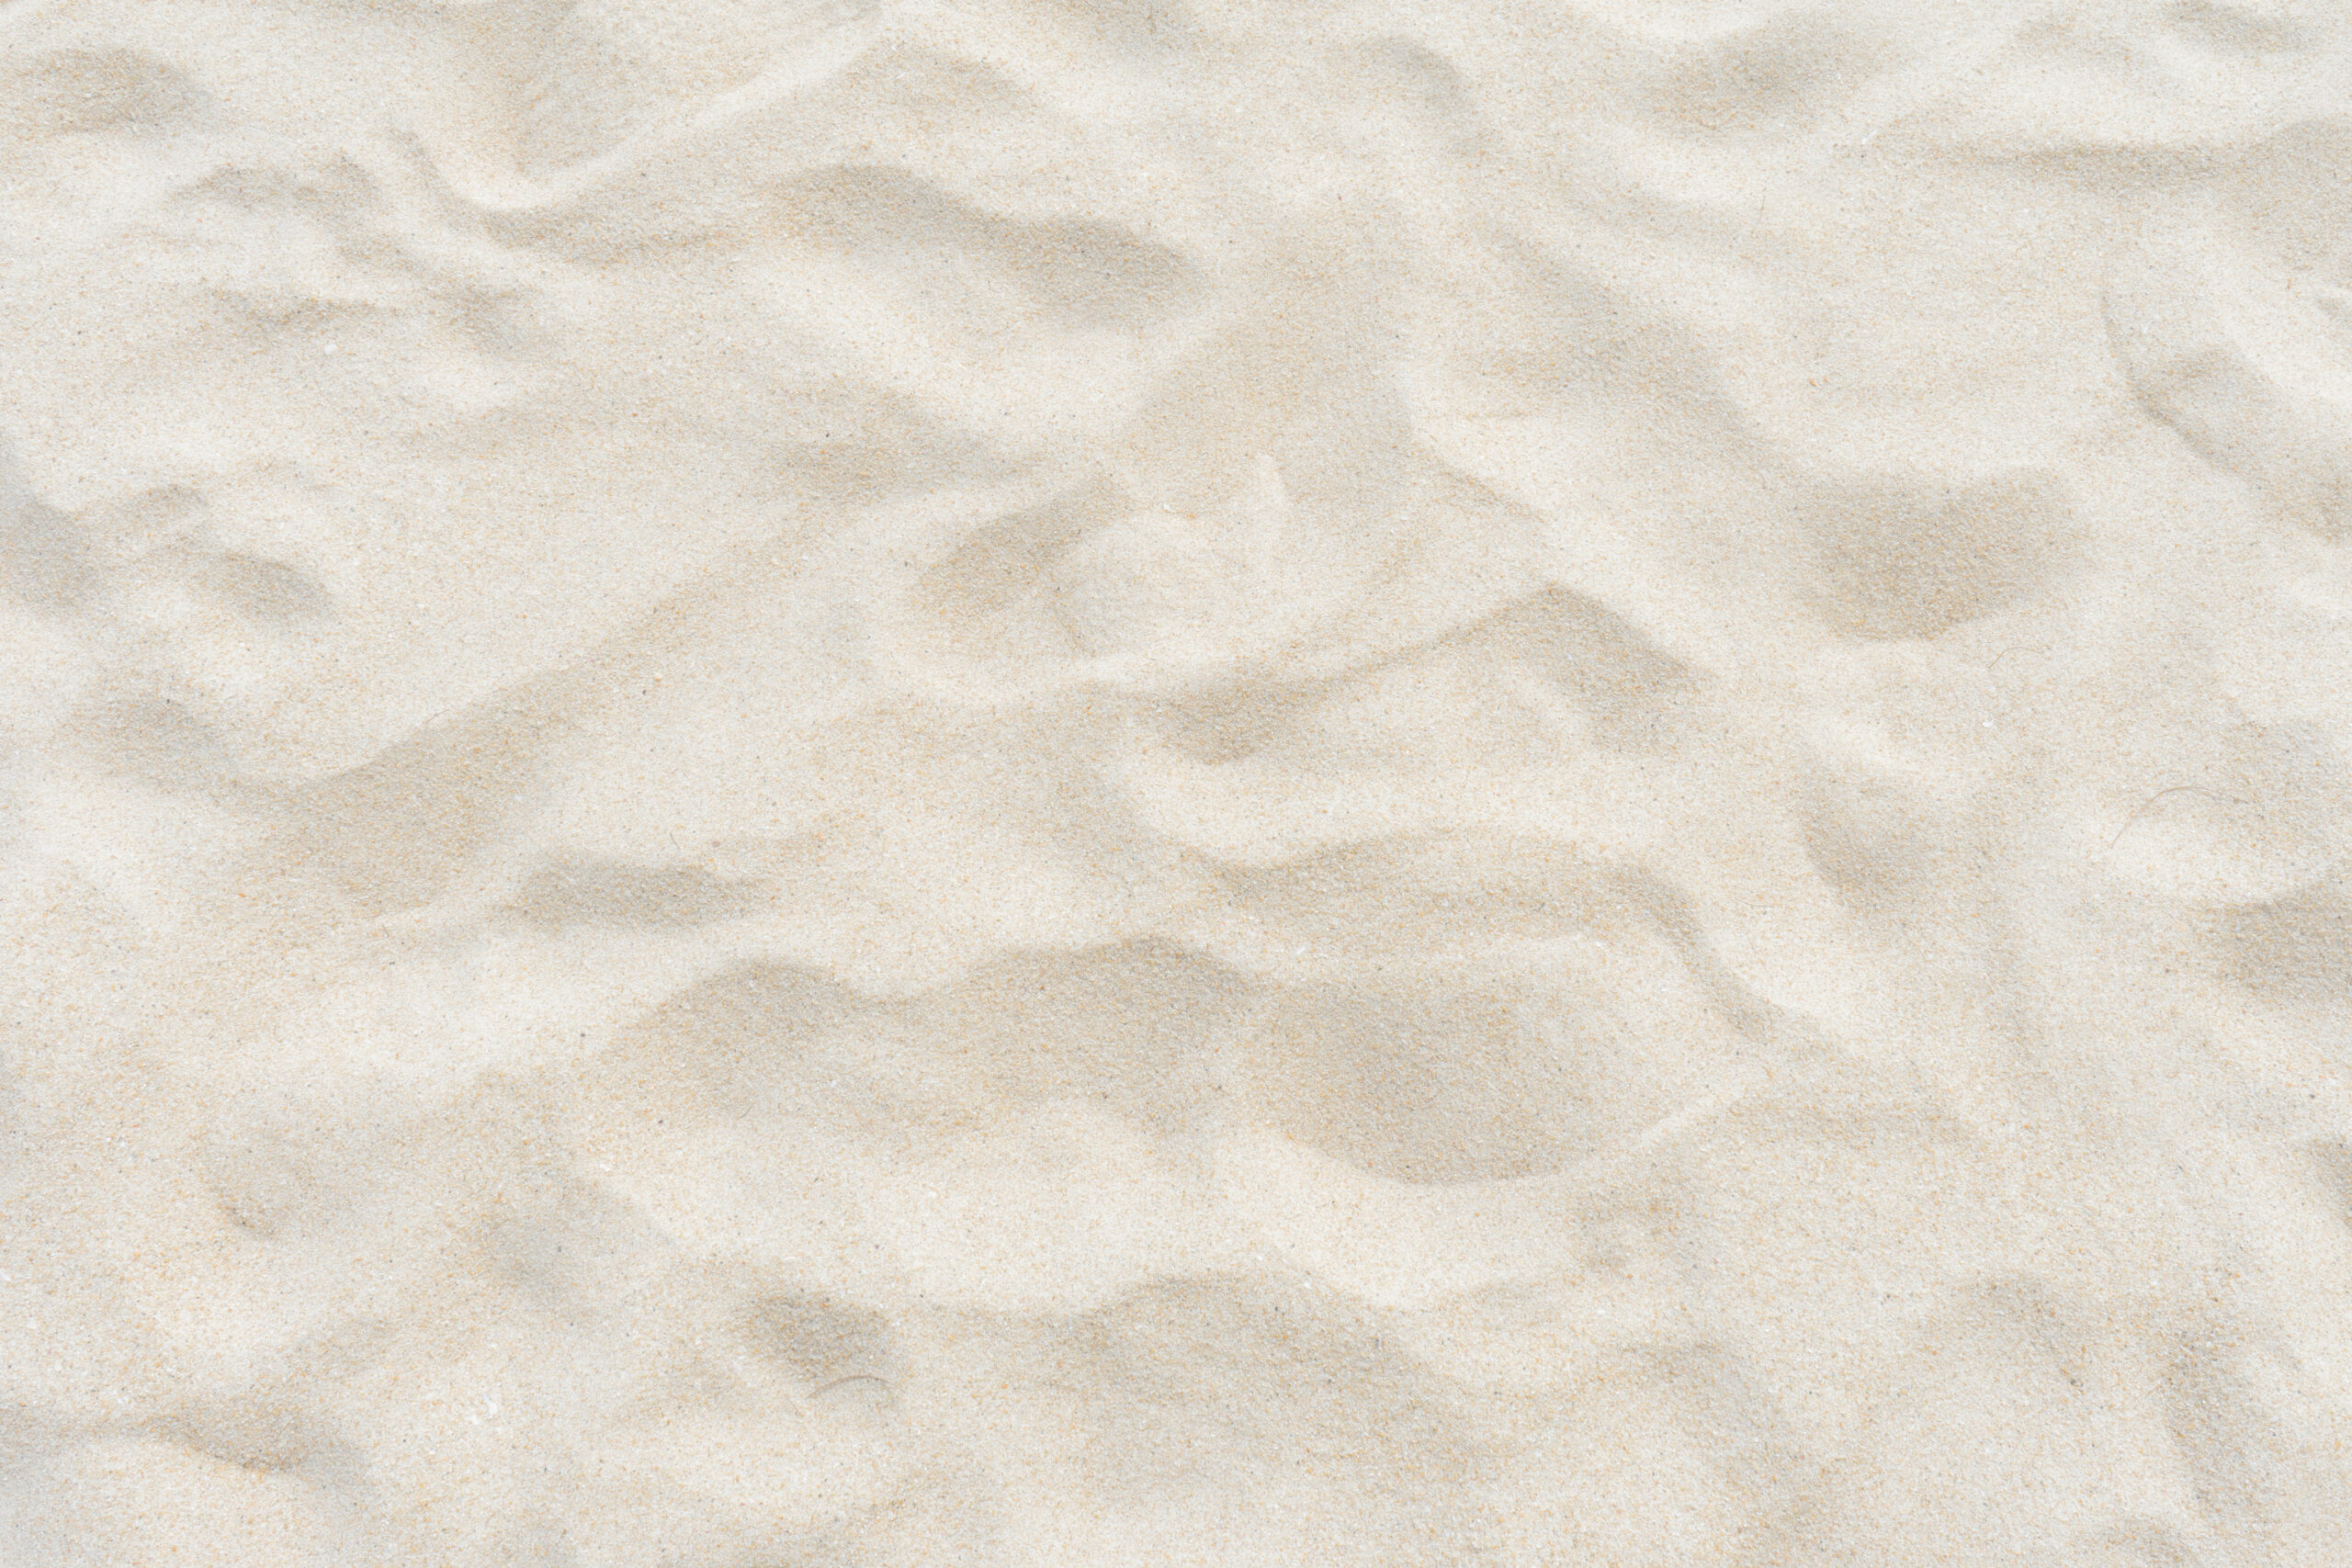 Full,Frame,Shot.,Close,Up,Sand,Texture,On,Beach,In